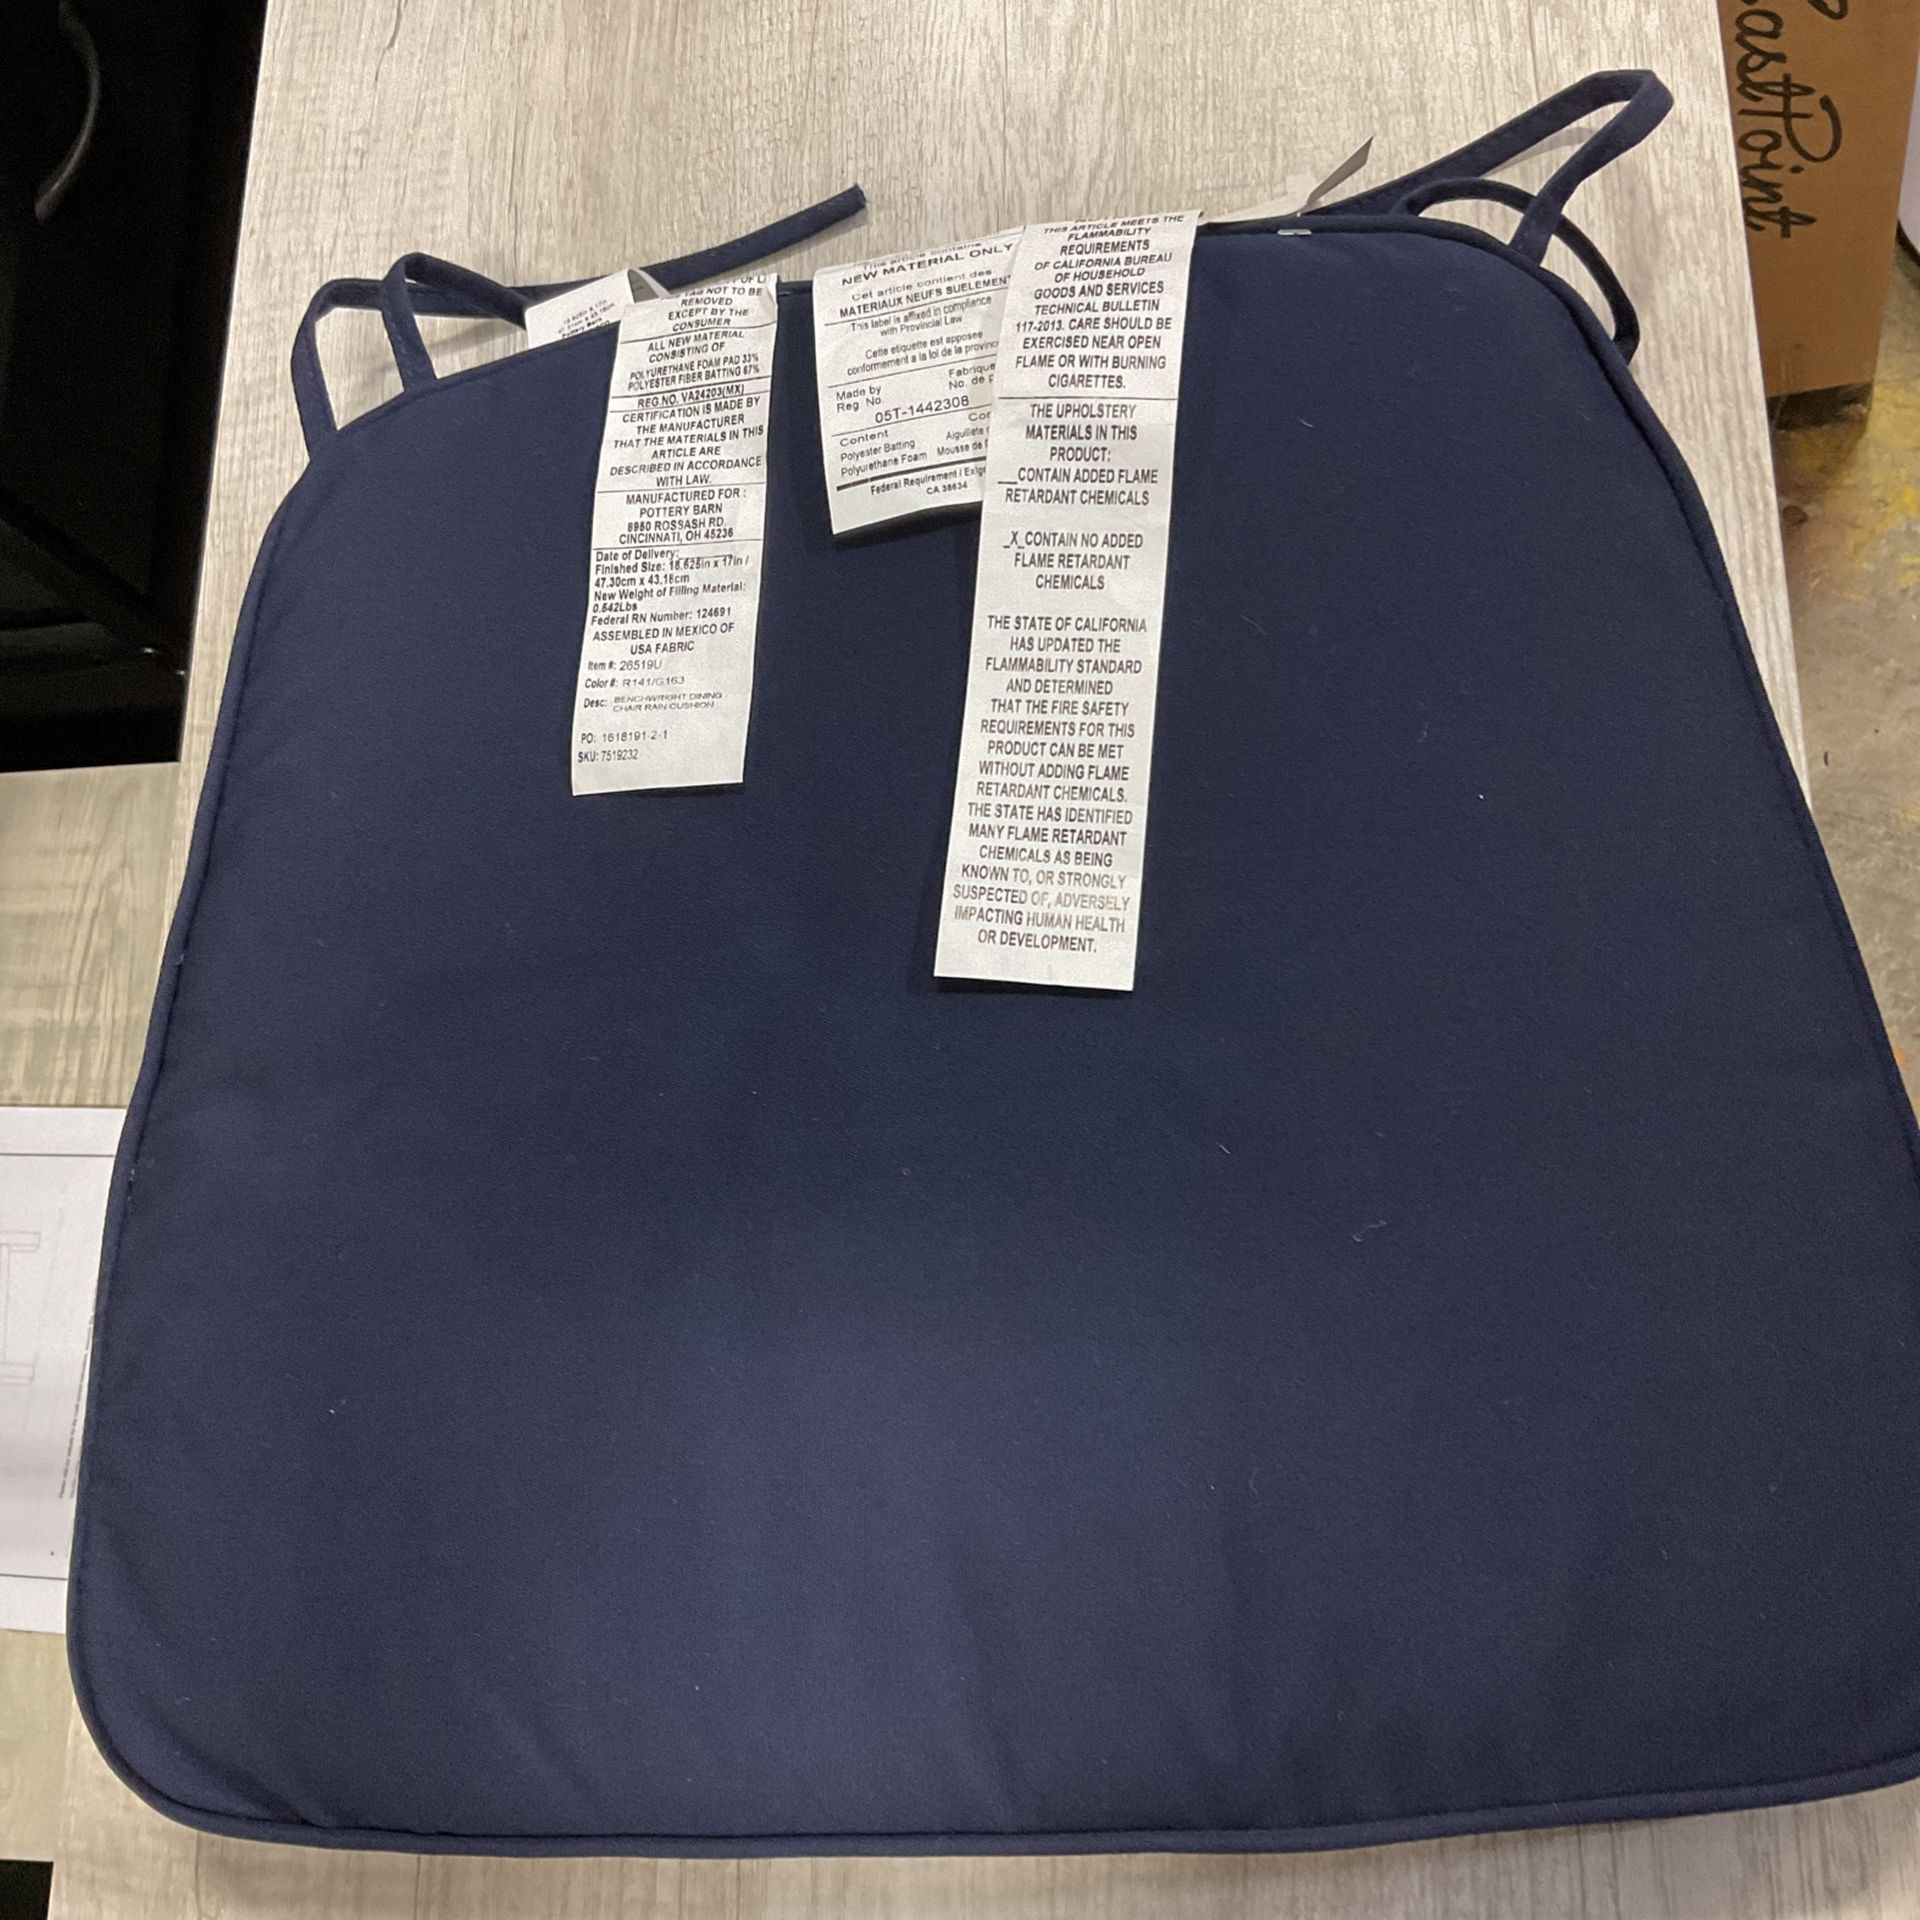 6 New Pottery Barn Benchwright Dining Chair Cushion  Blue